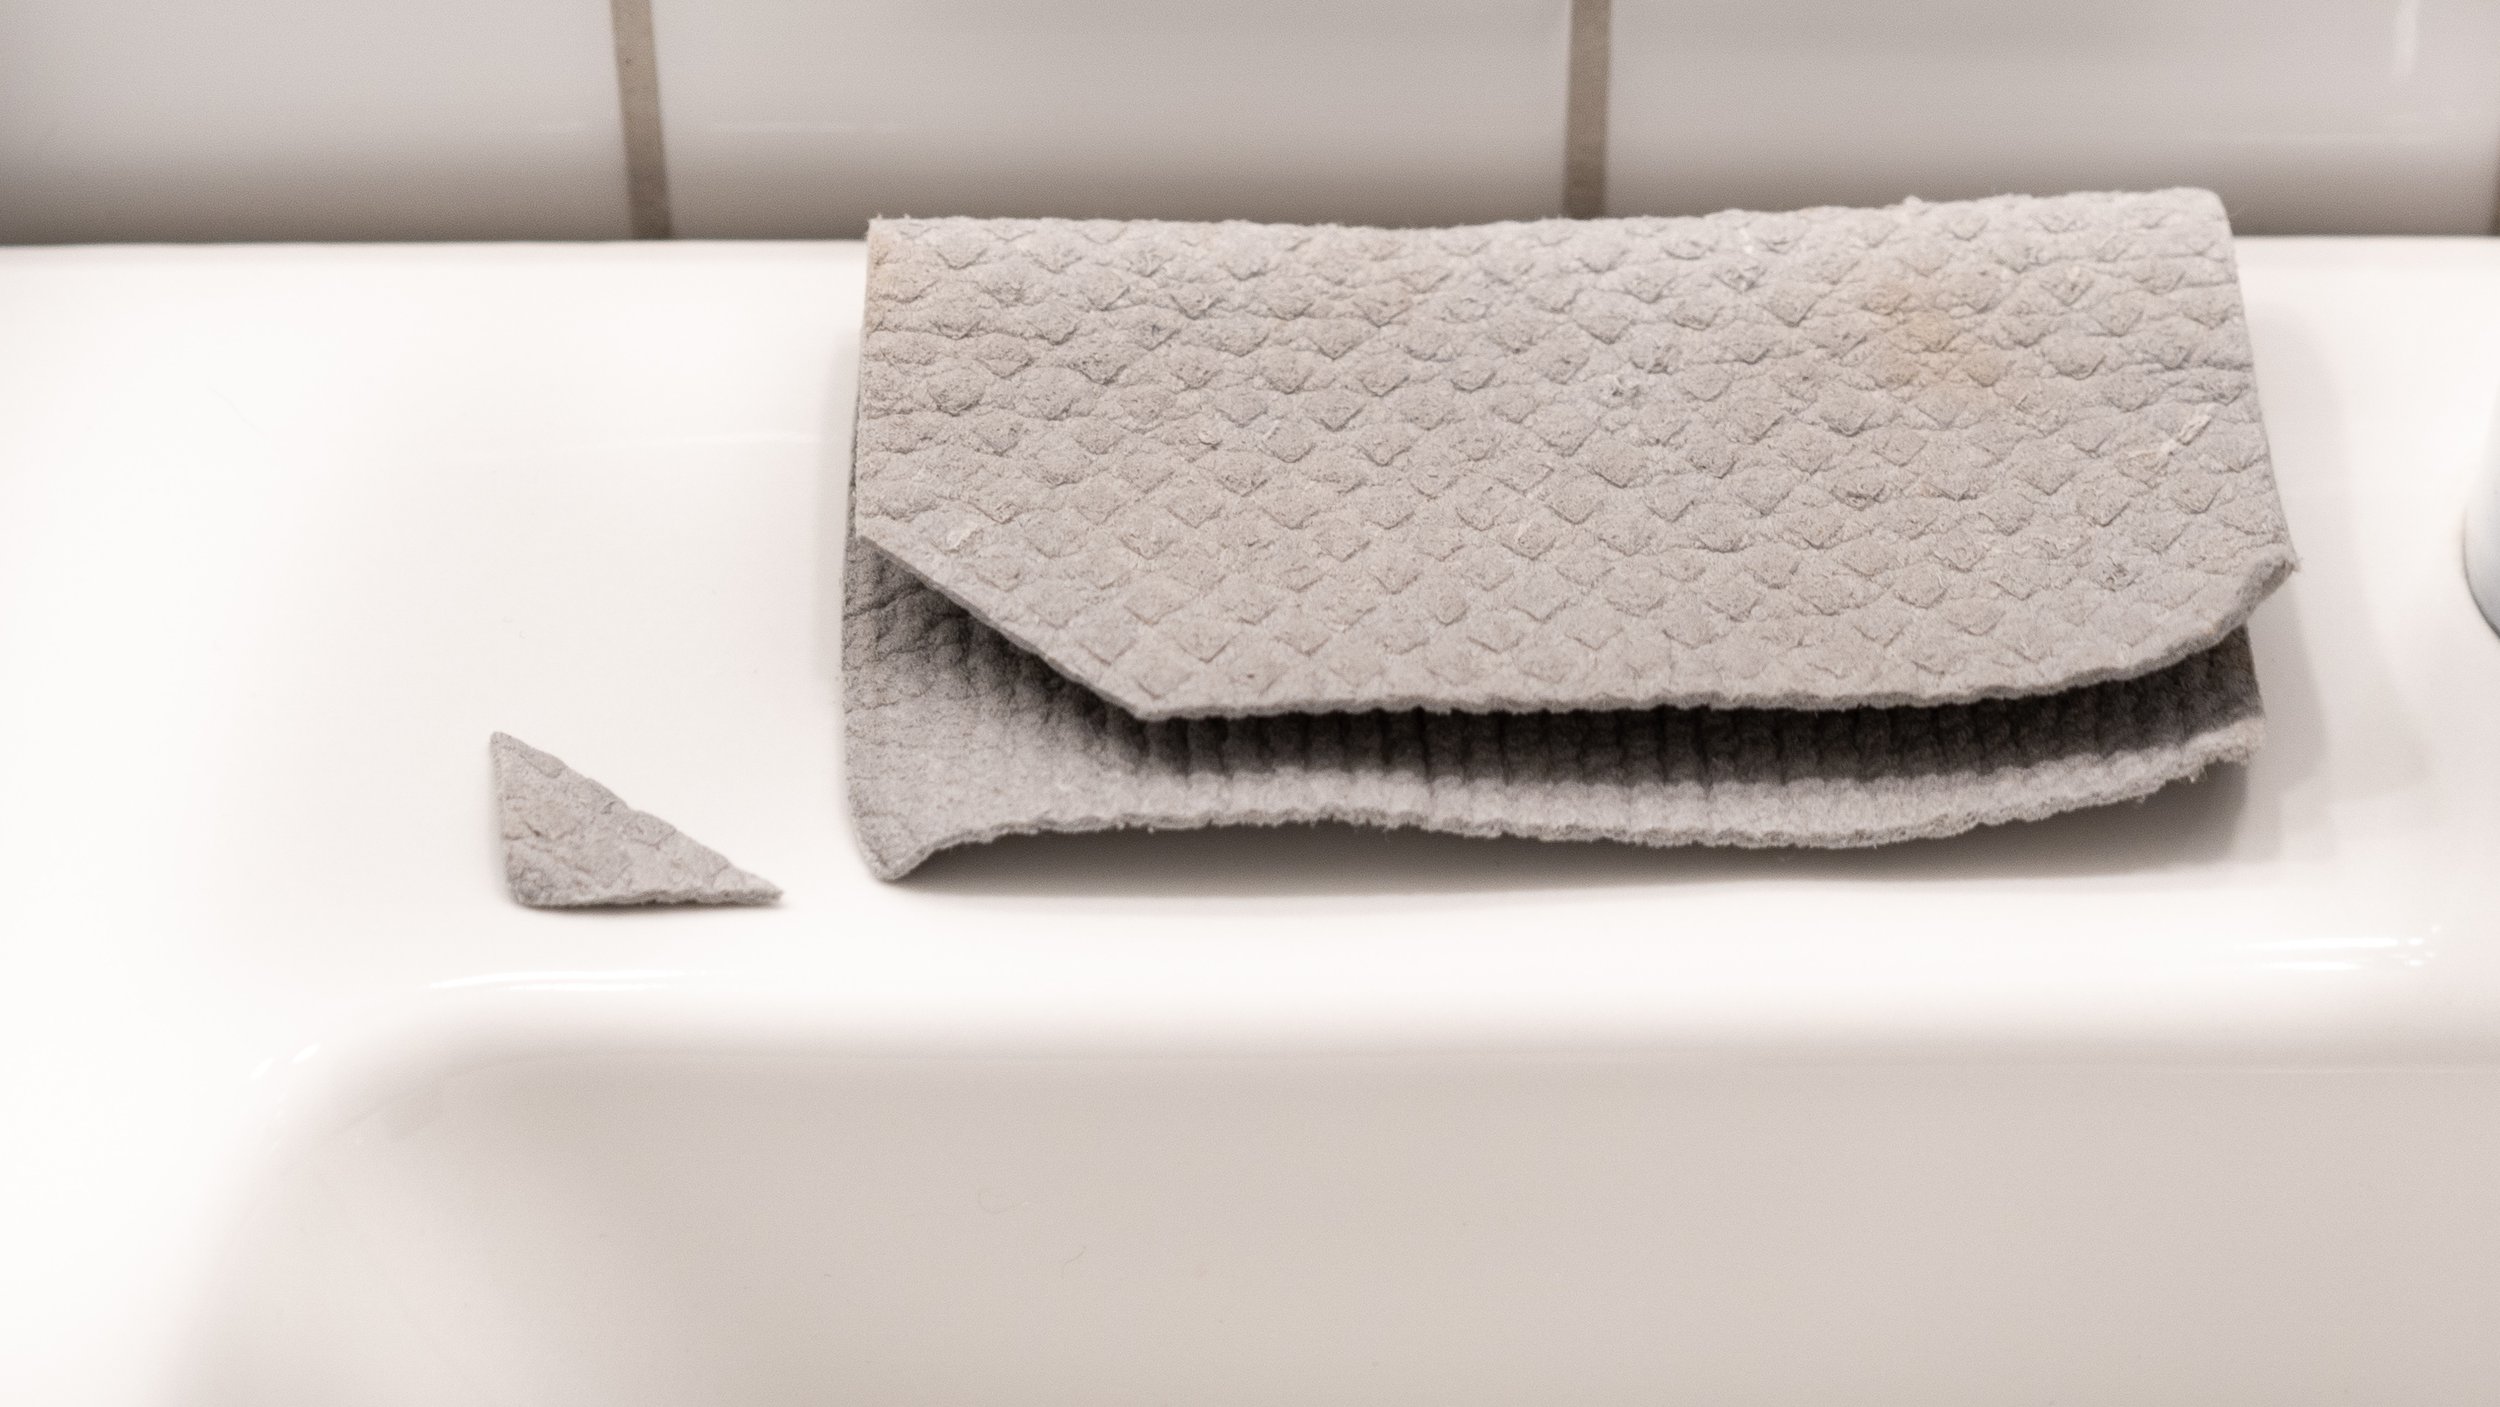 Swedish dishcloth for cleaning sustainably